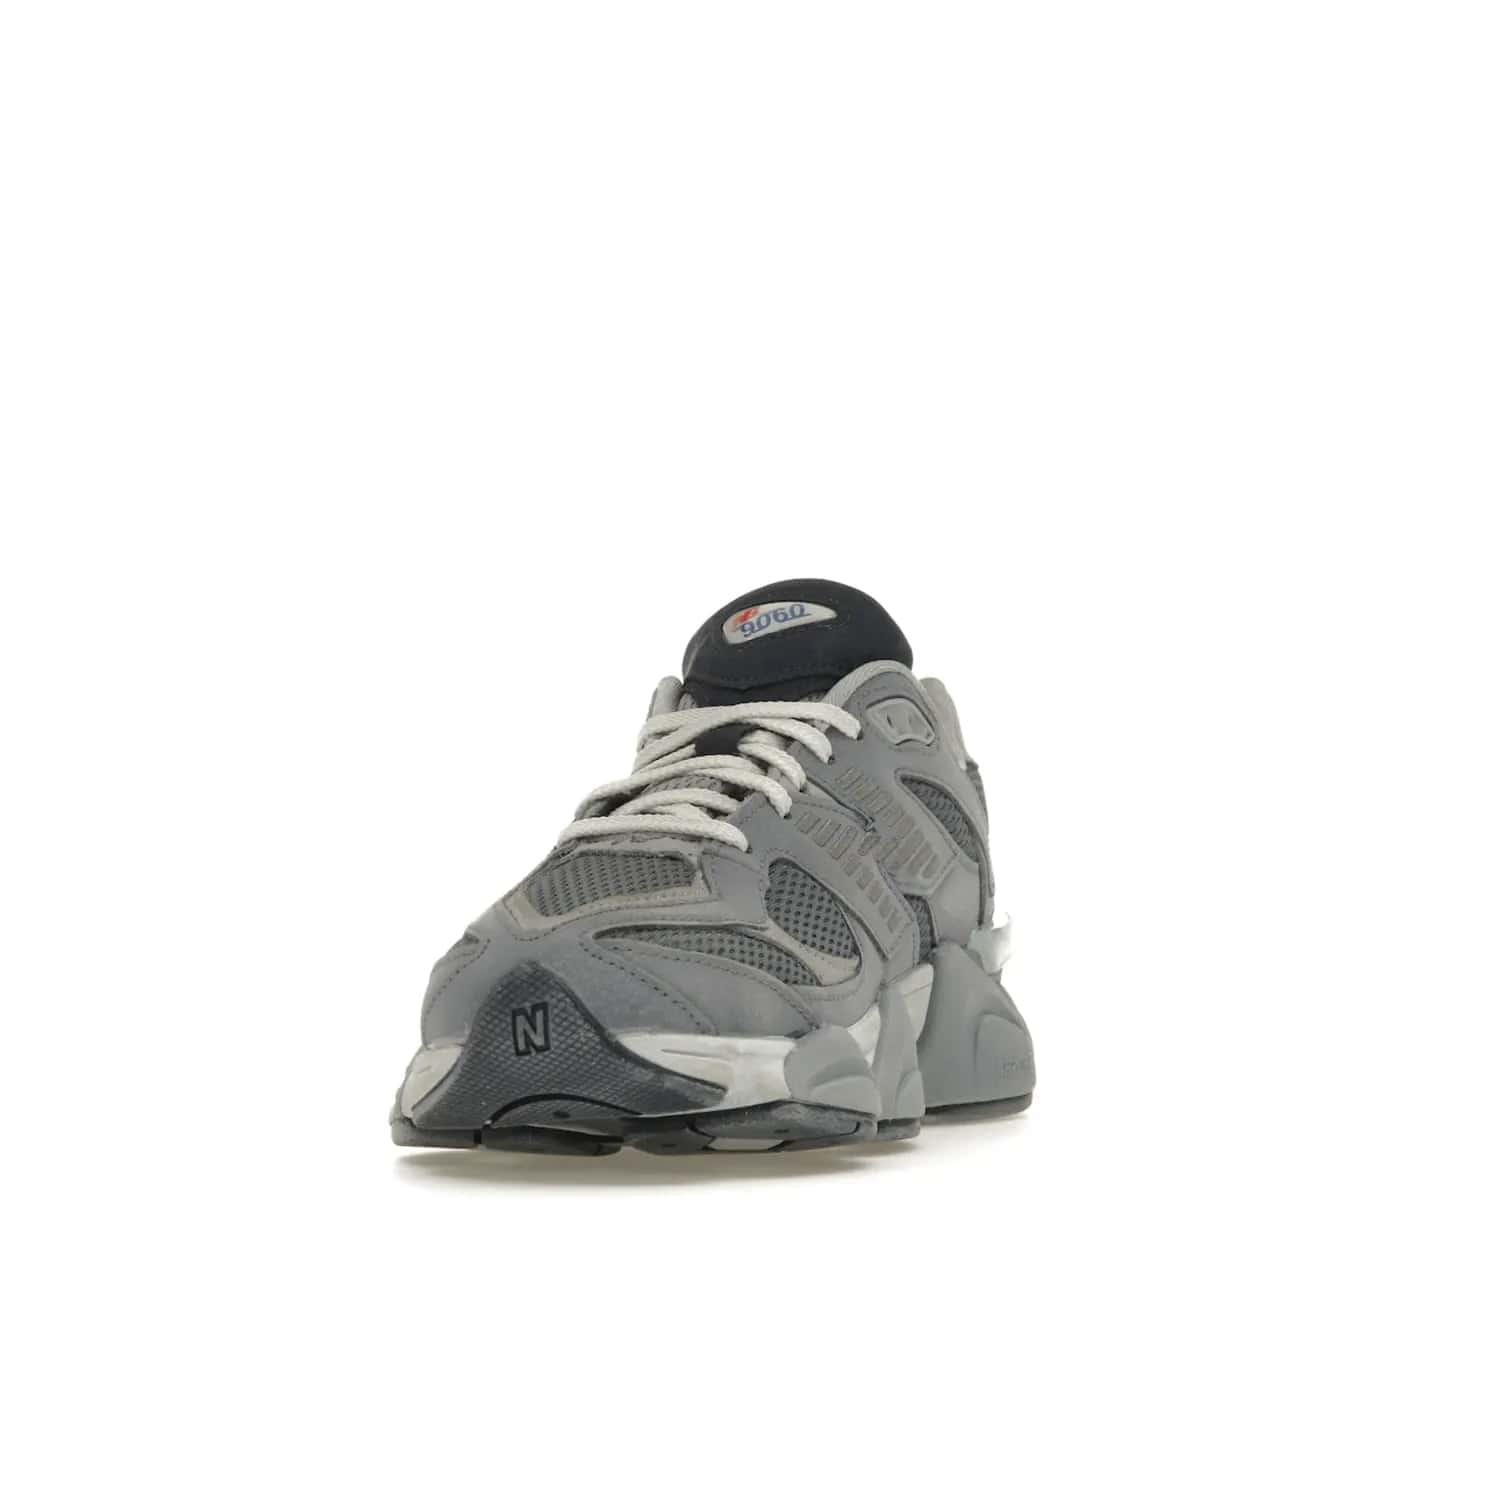 New Balance 9060 Grey Day (2023) - Image 12 - Only at www.BallersClubKickz.com - #
Sporty-meets-stylish in the New Balance 9060 Grey Day sneaker. Designed with Arctic Grey, Steel, and Silver Metallic, it offers an edgy but wearable look along with classic NB comfort and quality.